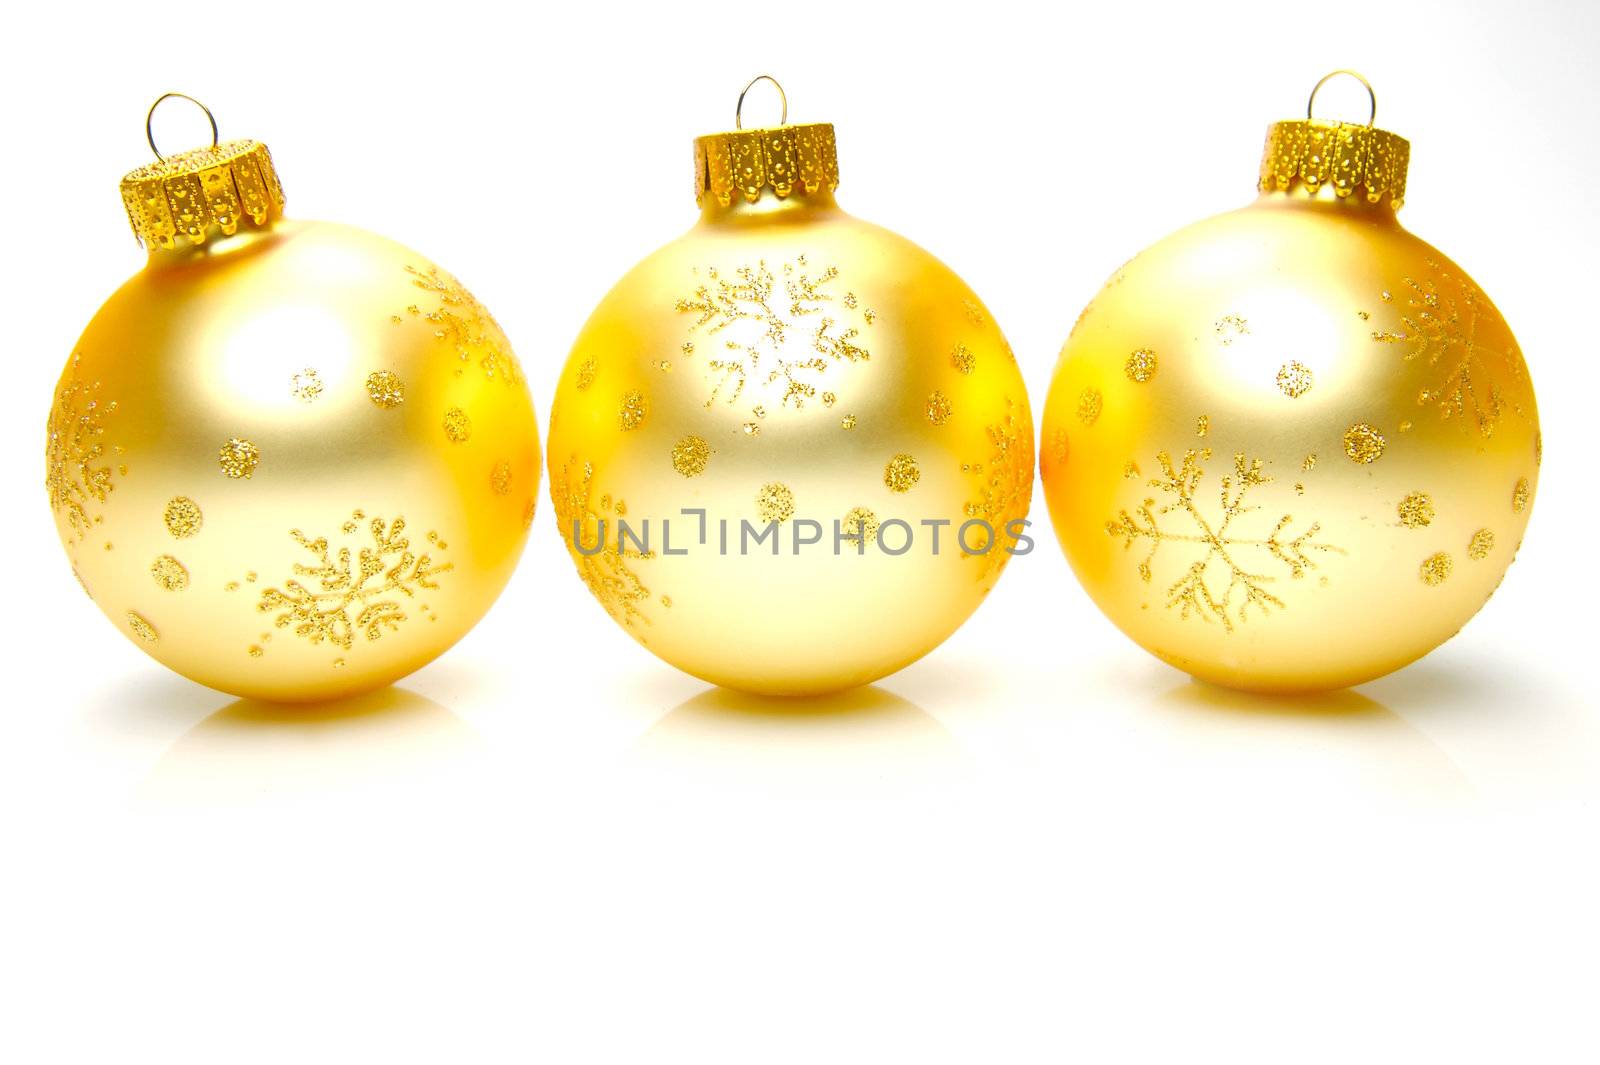 Christmas Ornaments by Kitch